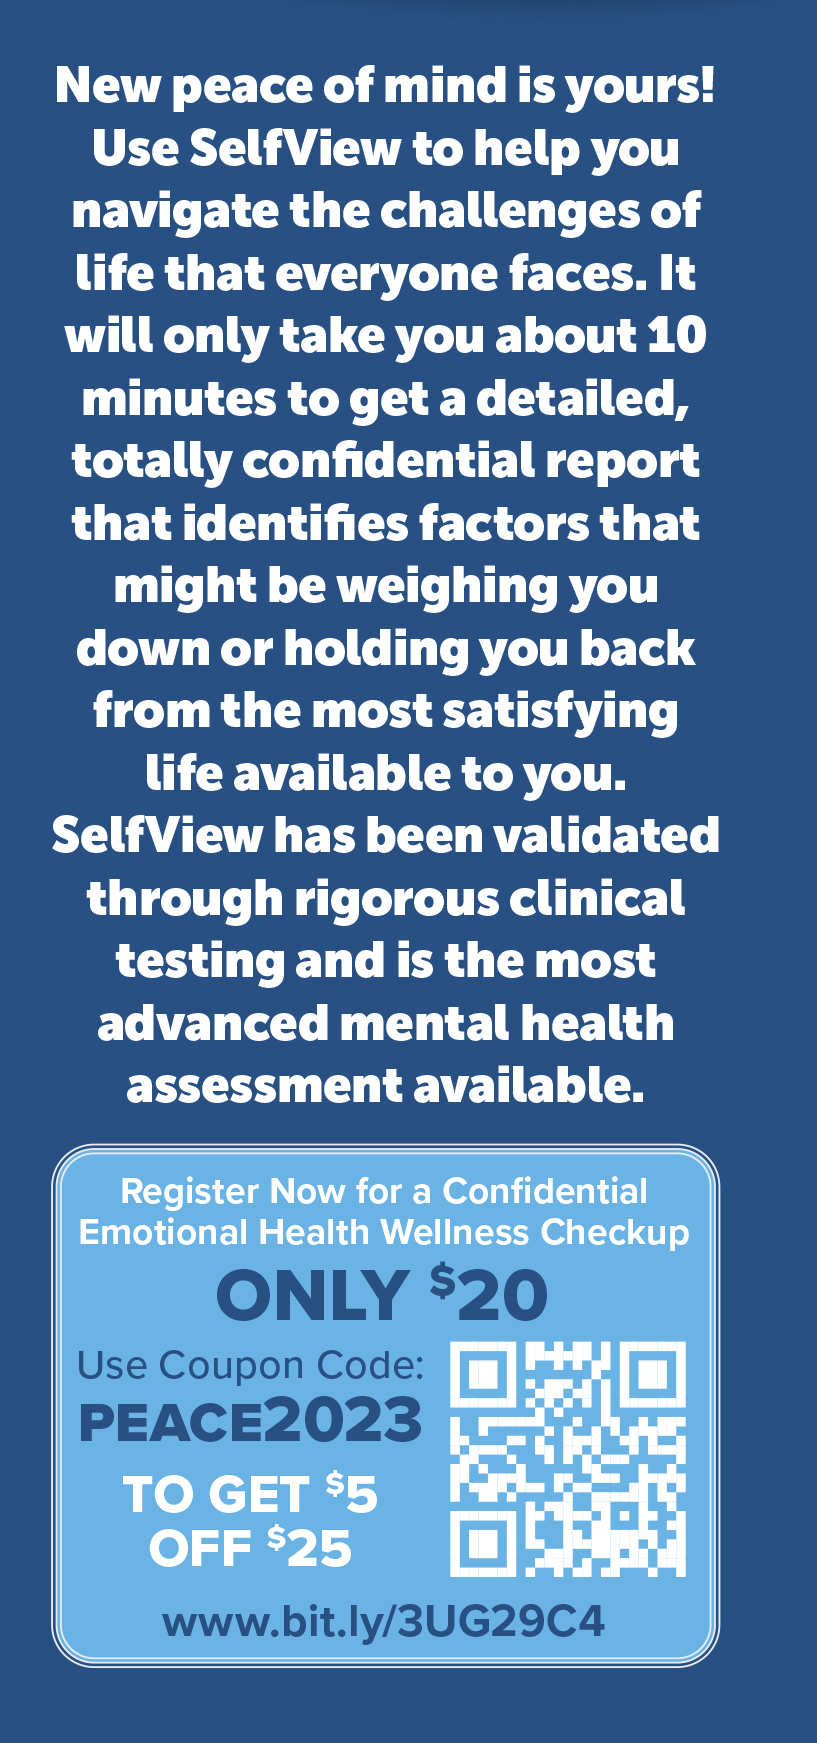 SelfView Personal Emotional-Mental Wellness Assessment from PsycHealth - SelfView.net